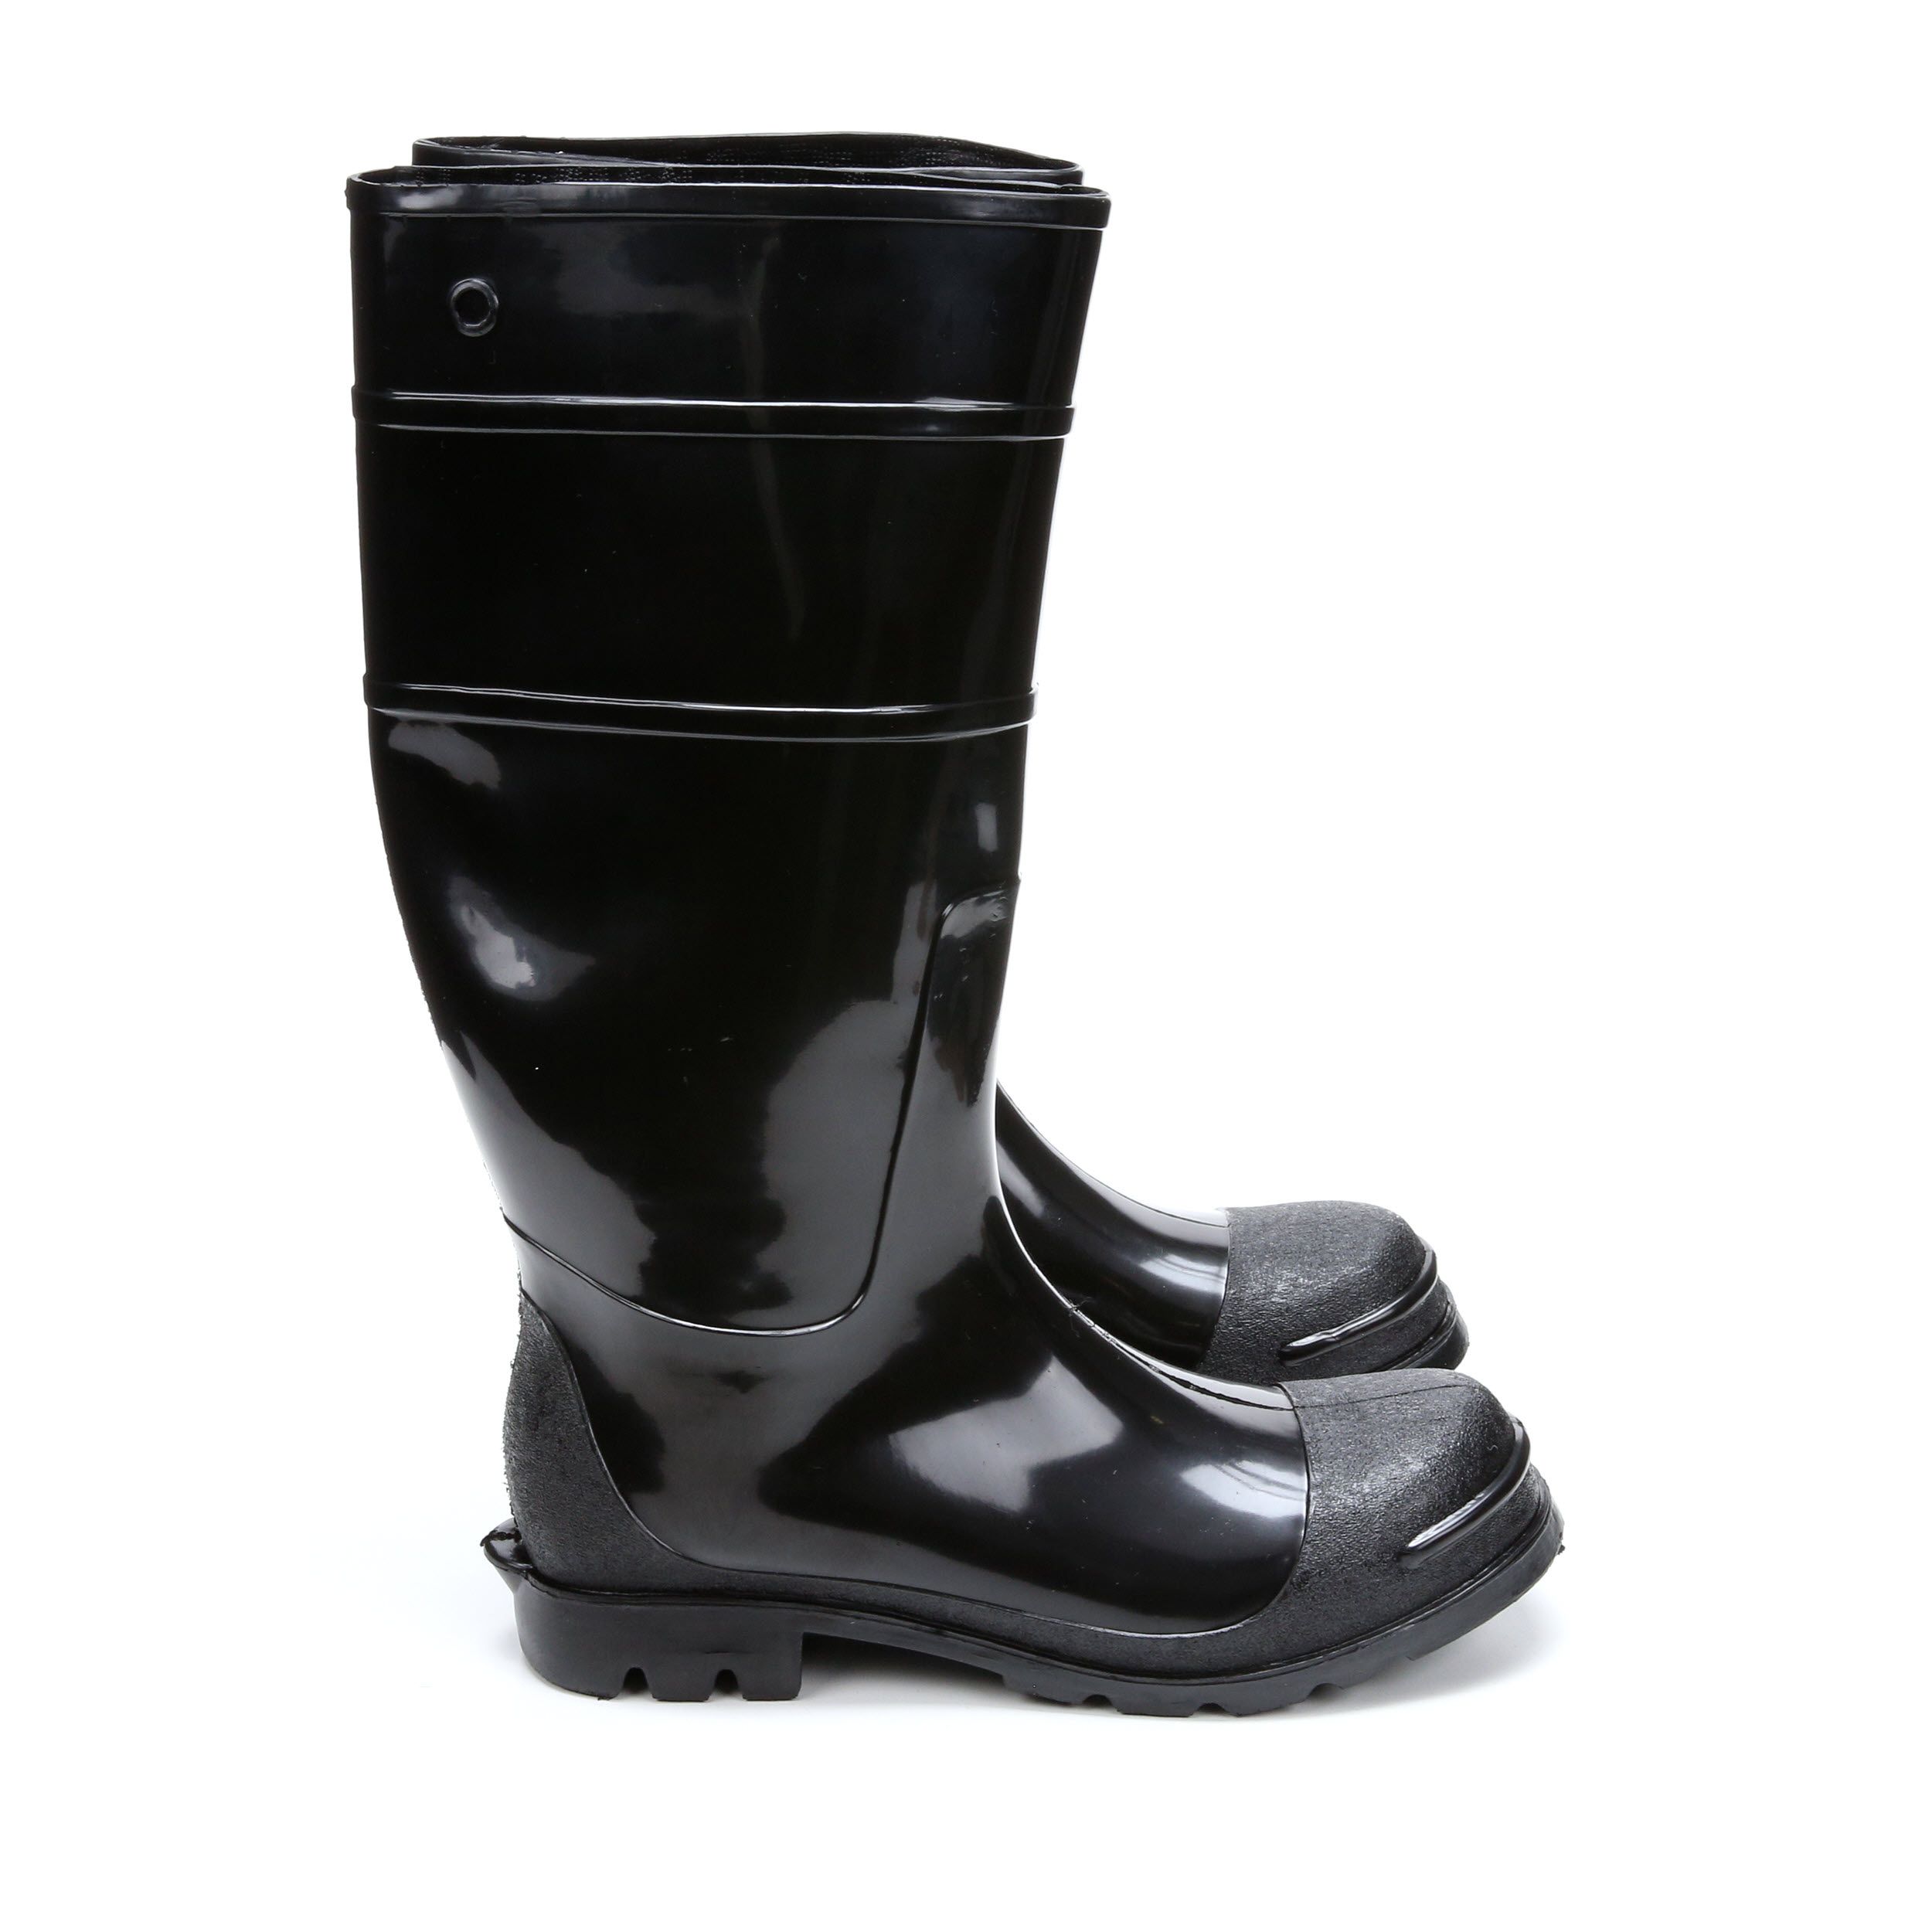 West Chester Mens White Waterproof Rubber Boots Size: 11 Medium in